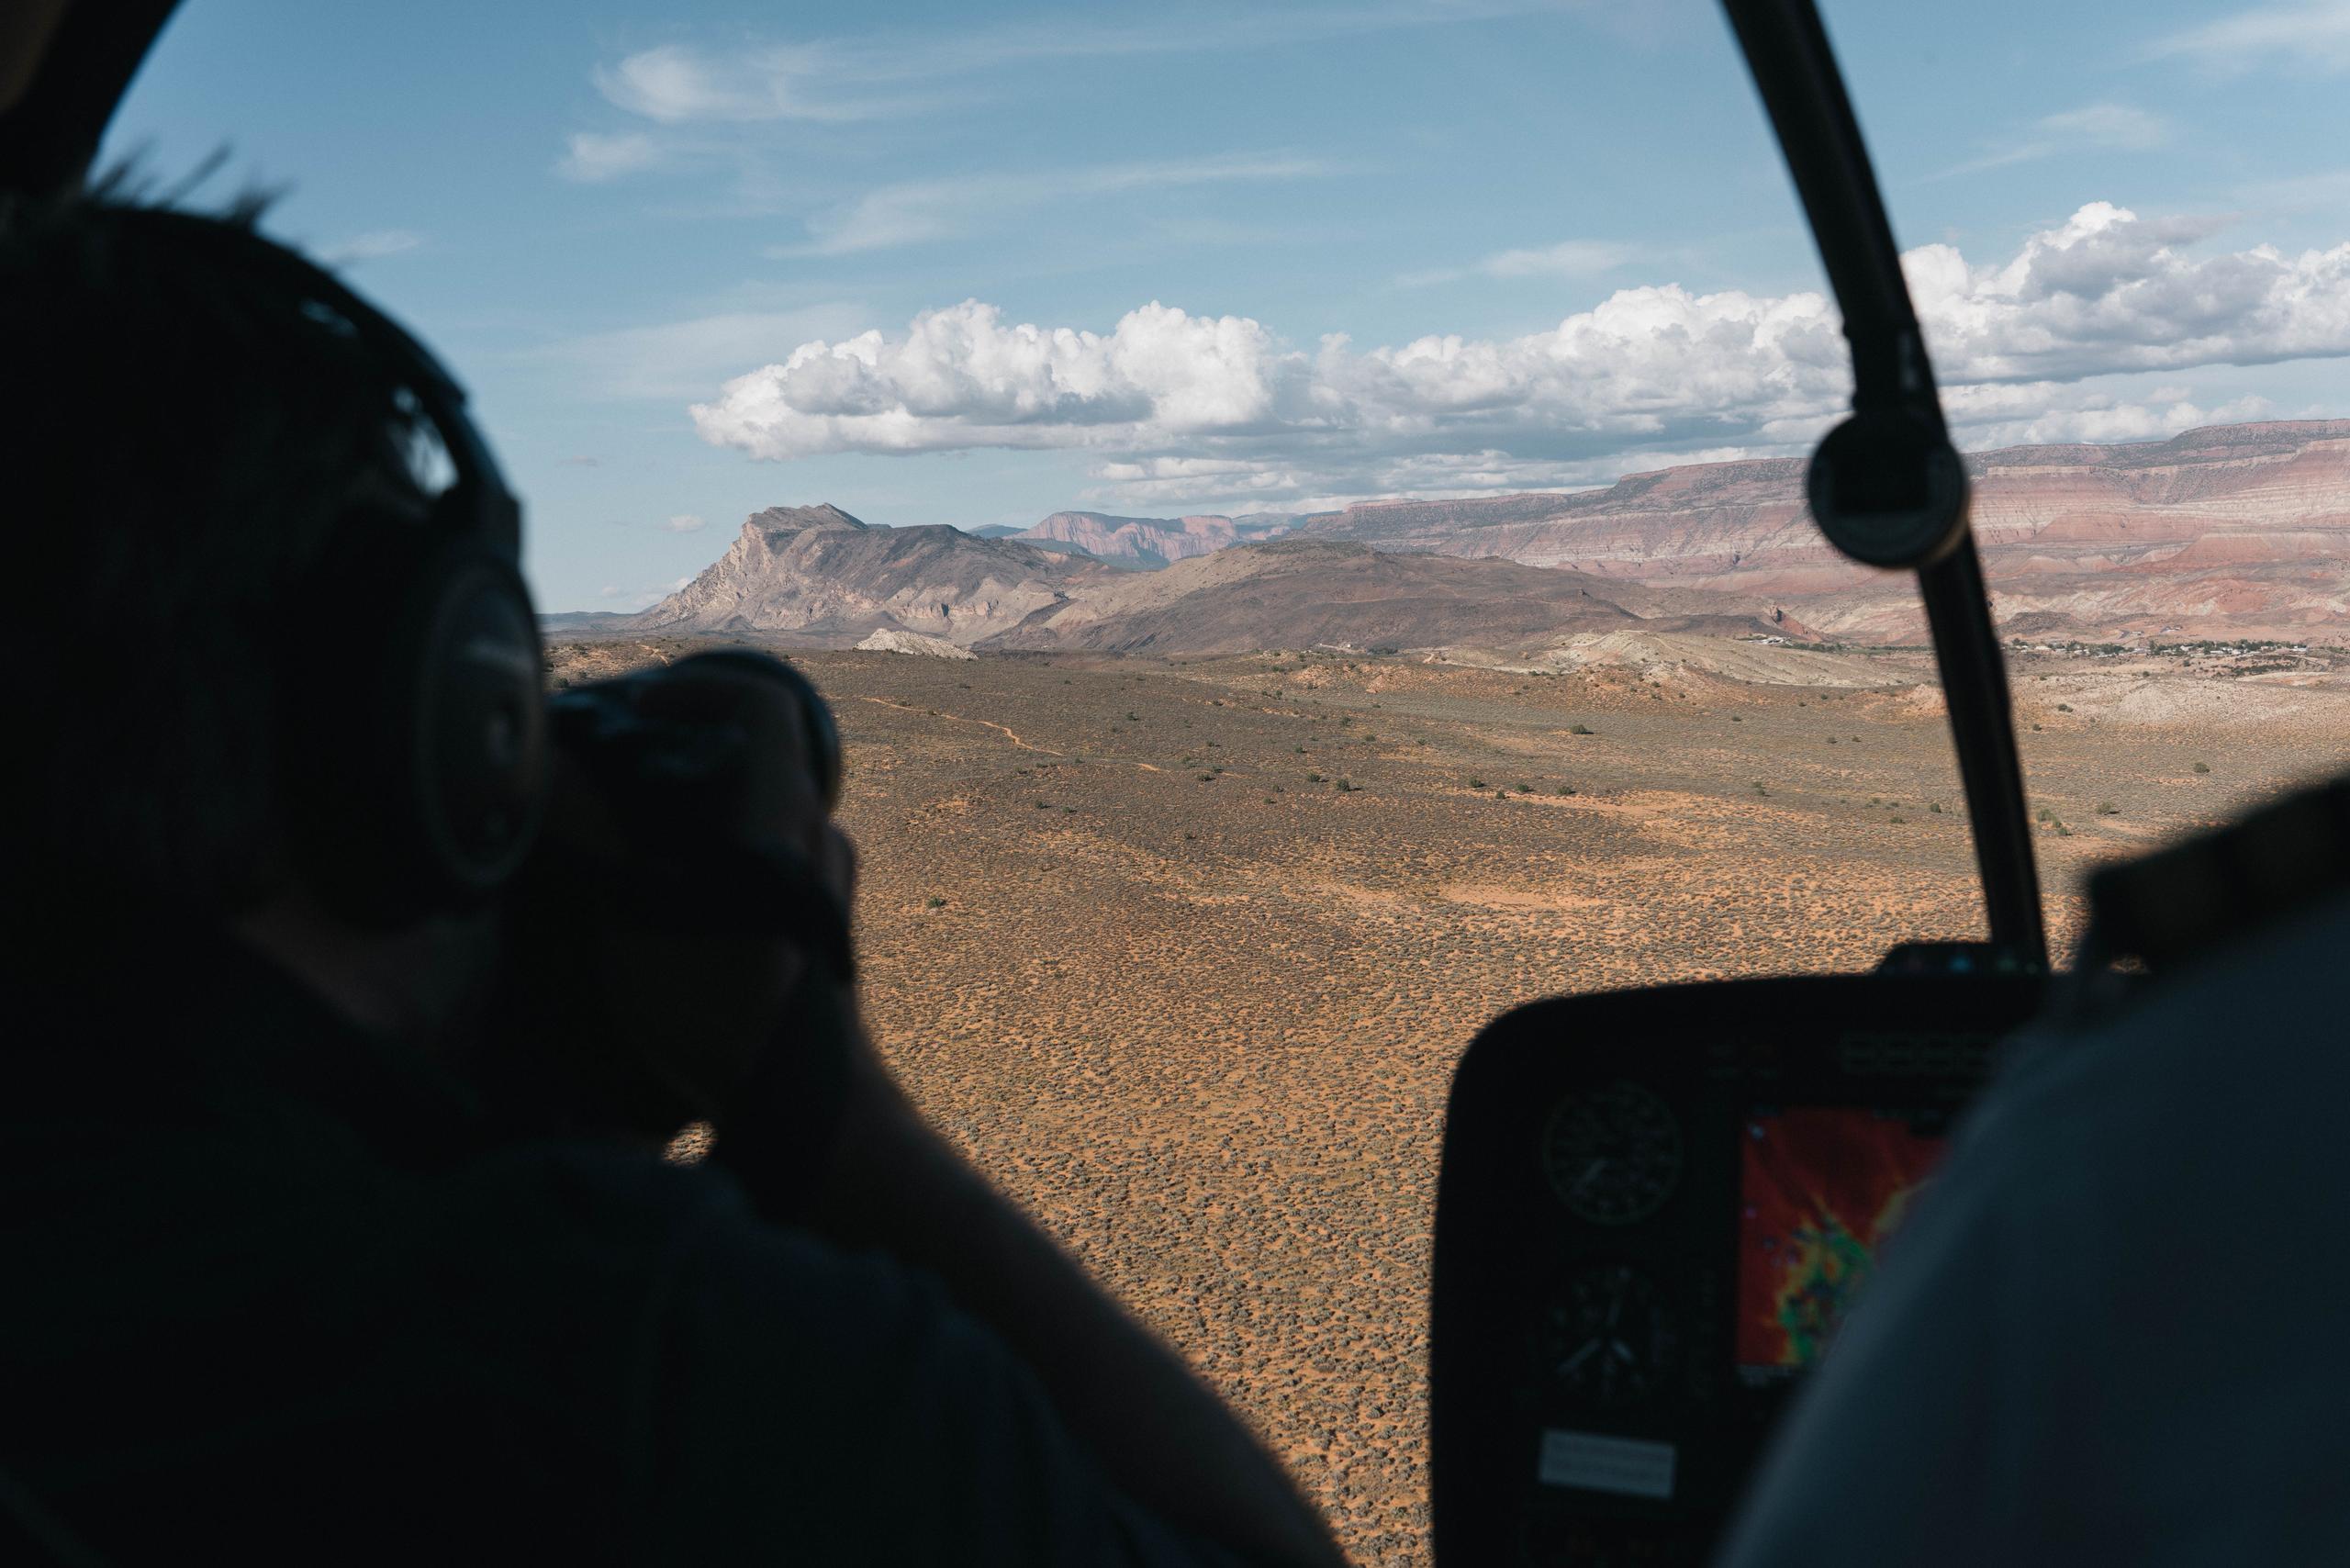 Photographer in helicopter overlooking Zion National Park